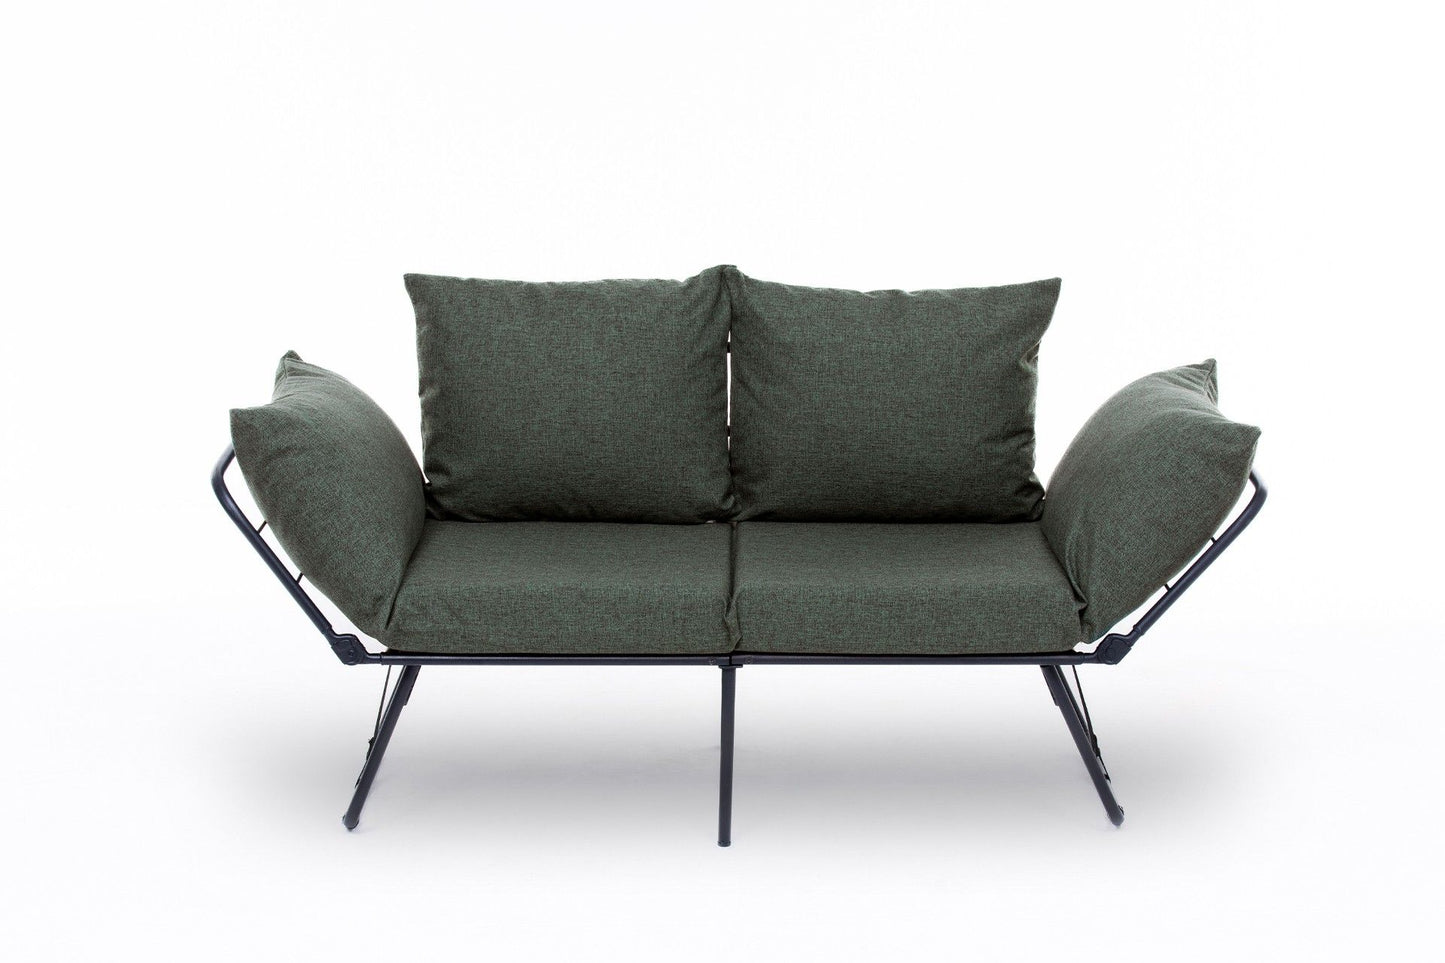 Viper 2-Seater - Green - 2-Seat Sofa-Bed